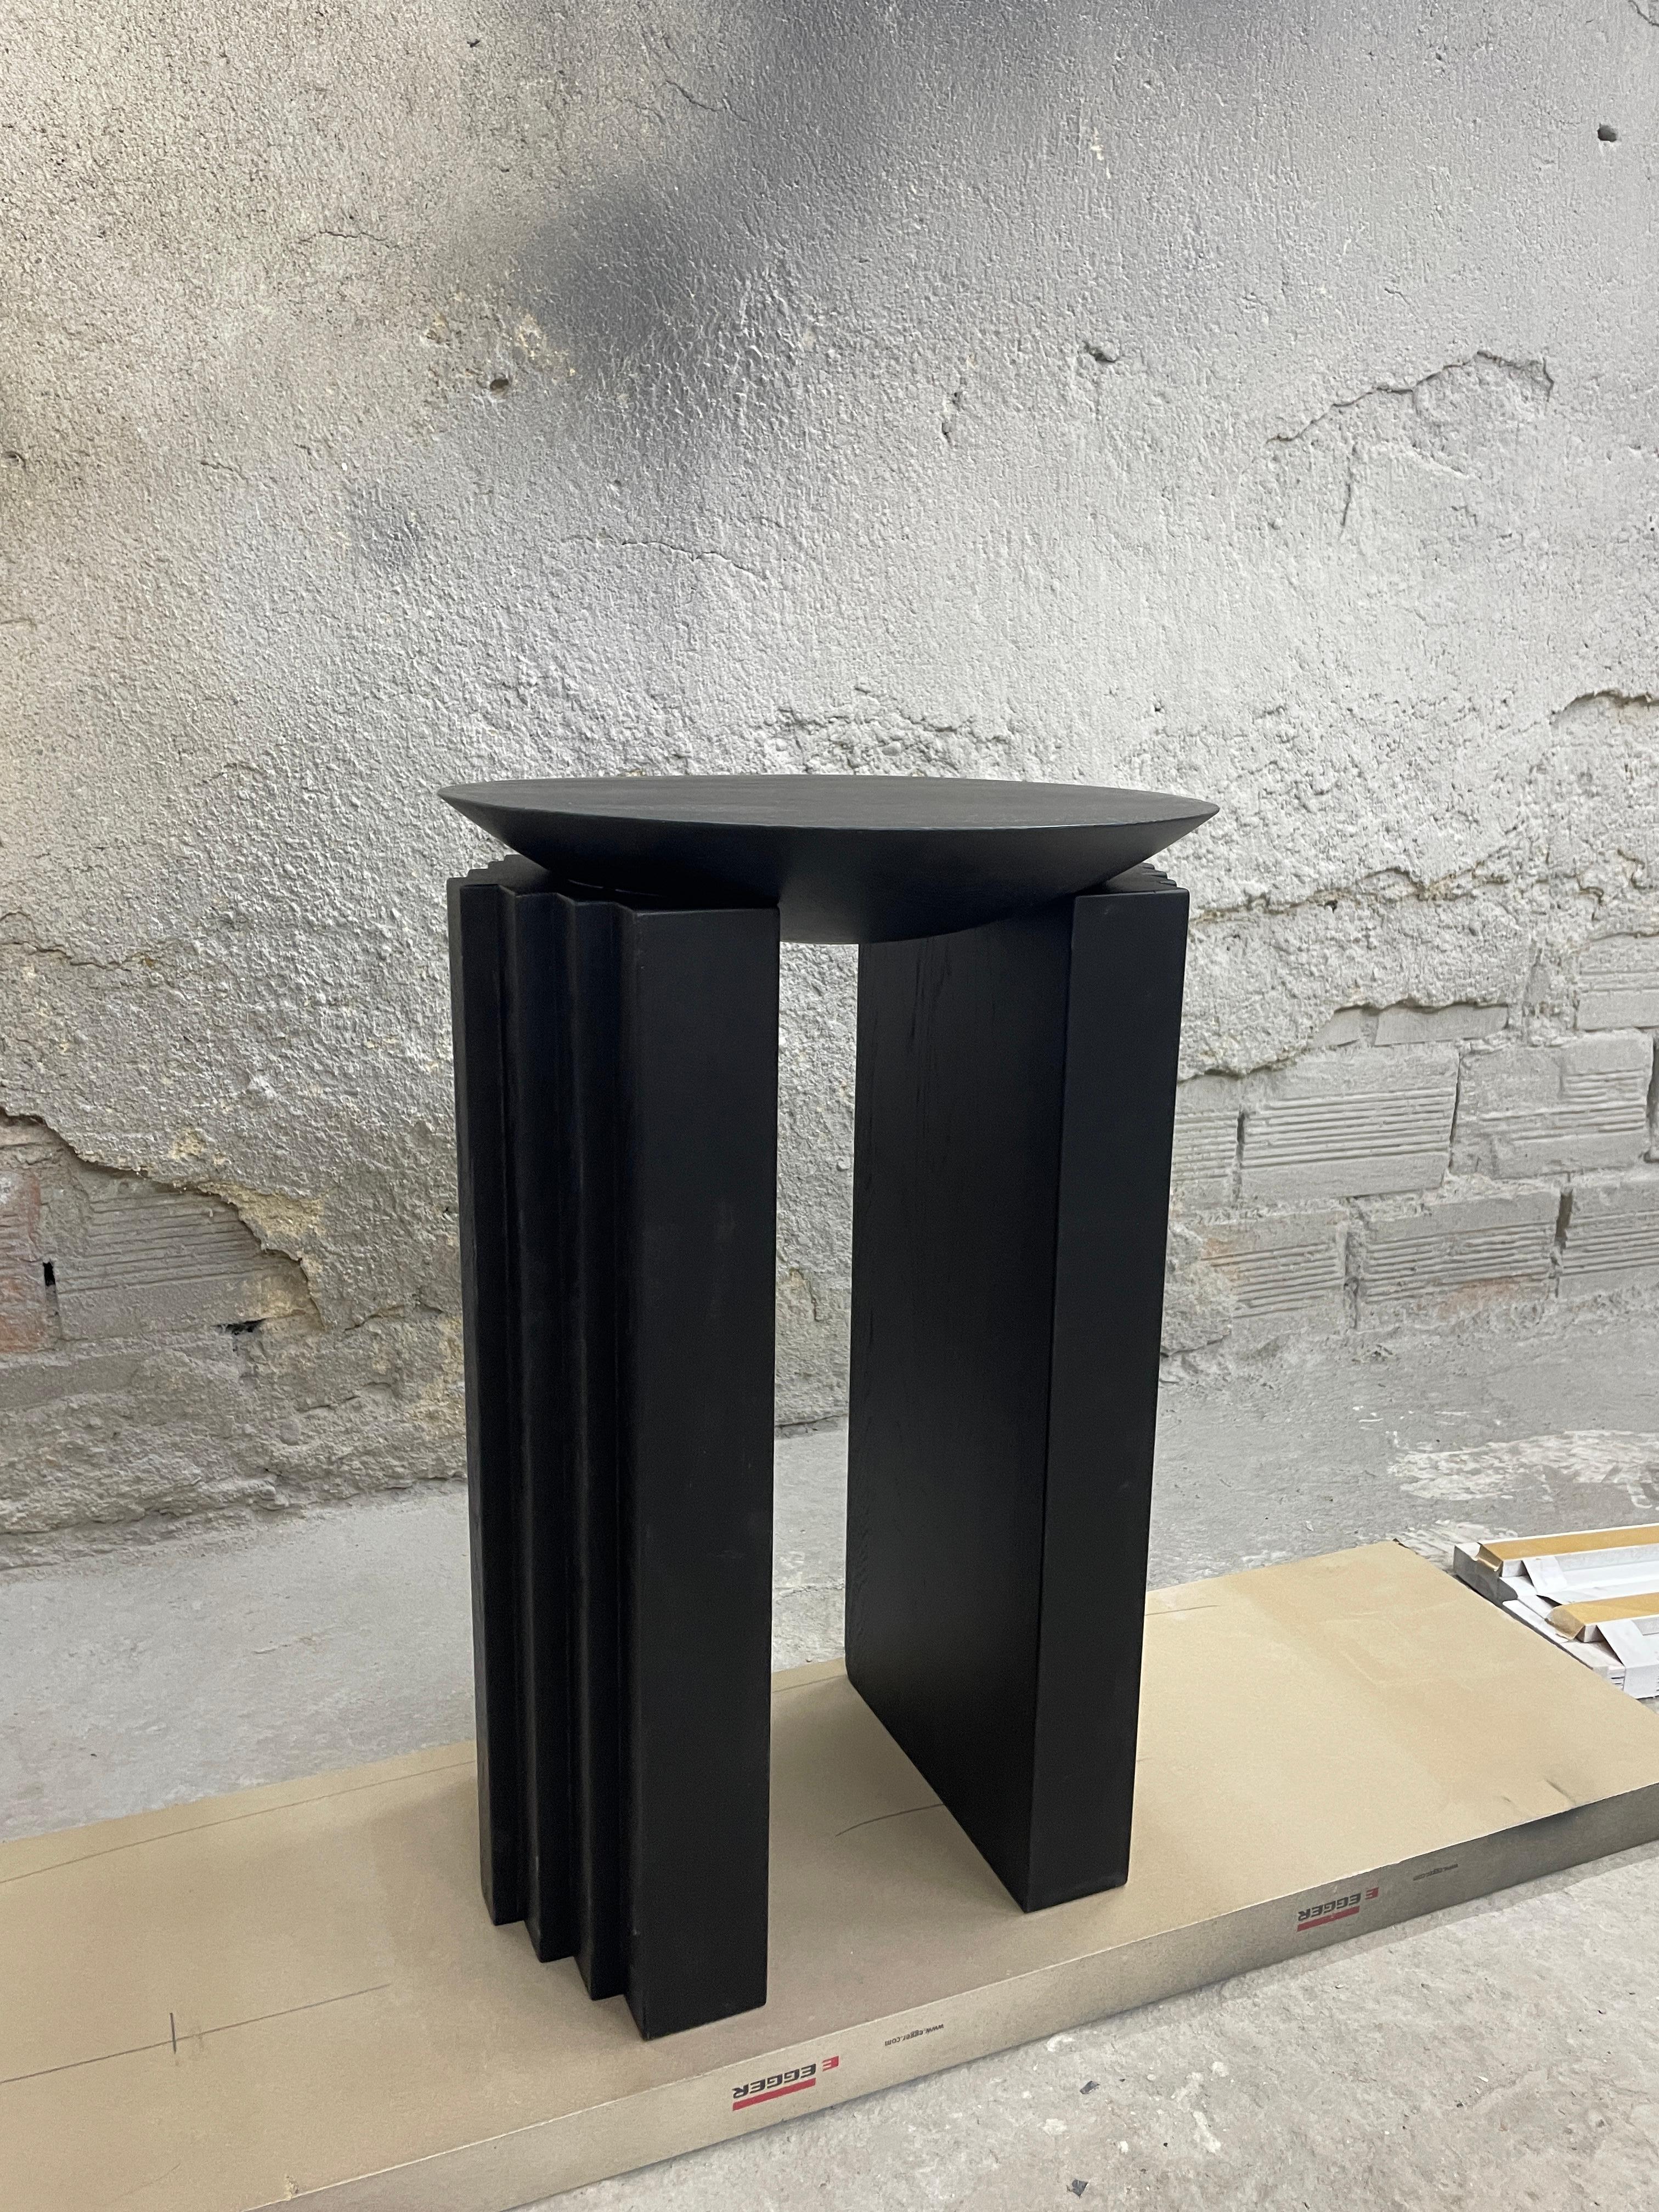 “Black beauty” is a sculptural side table in oak wood created by the artist Desia Ava. 
The piece features strong lines and gentle curves. Marked by architectural aesthetics, on the borderline between sculpture and furniture the solid wood has been